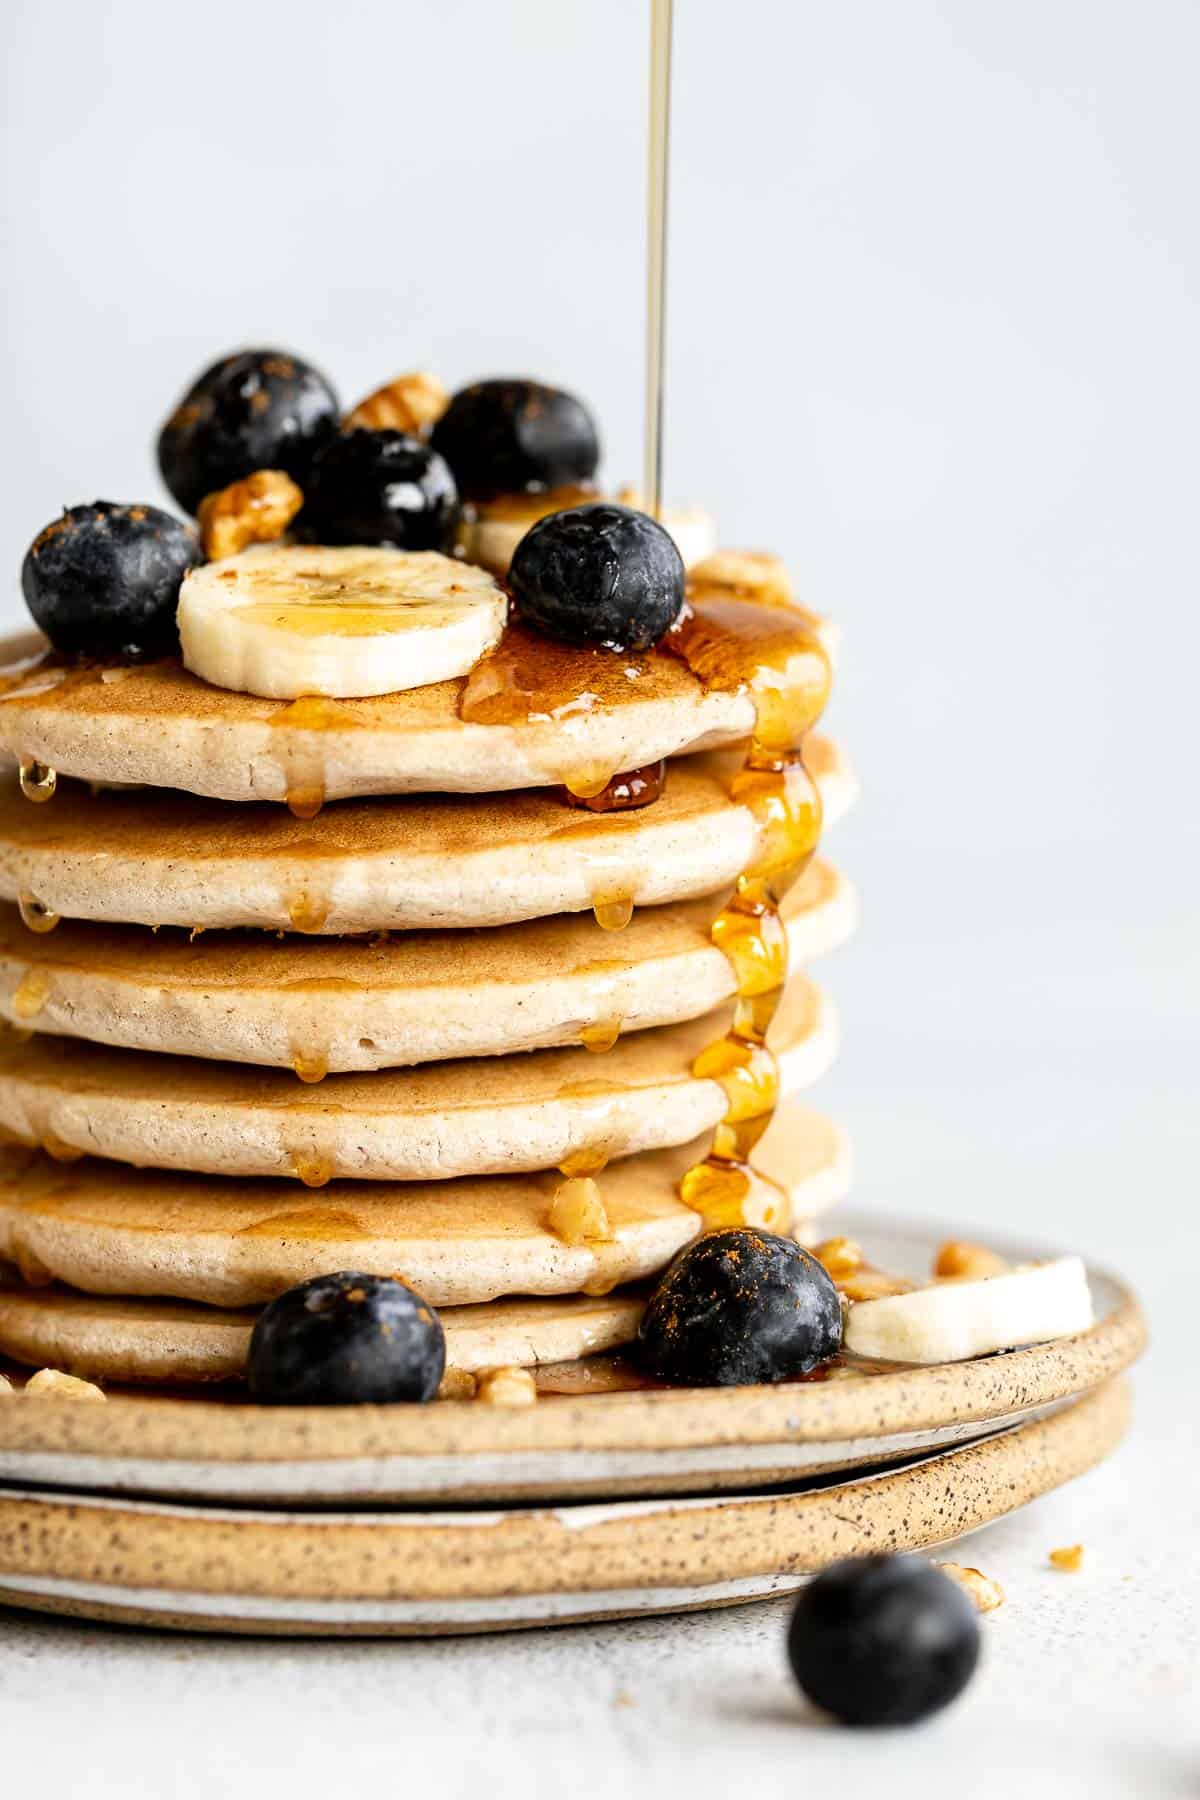 up close of the stack of pancakes with maple syrup drips